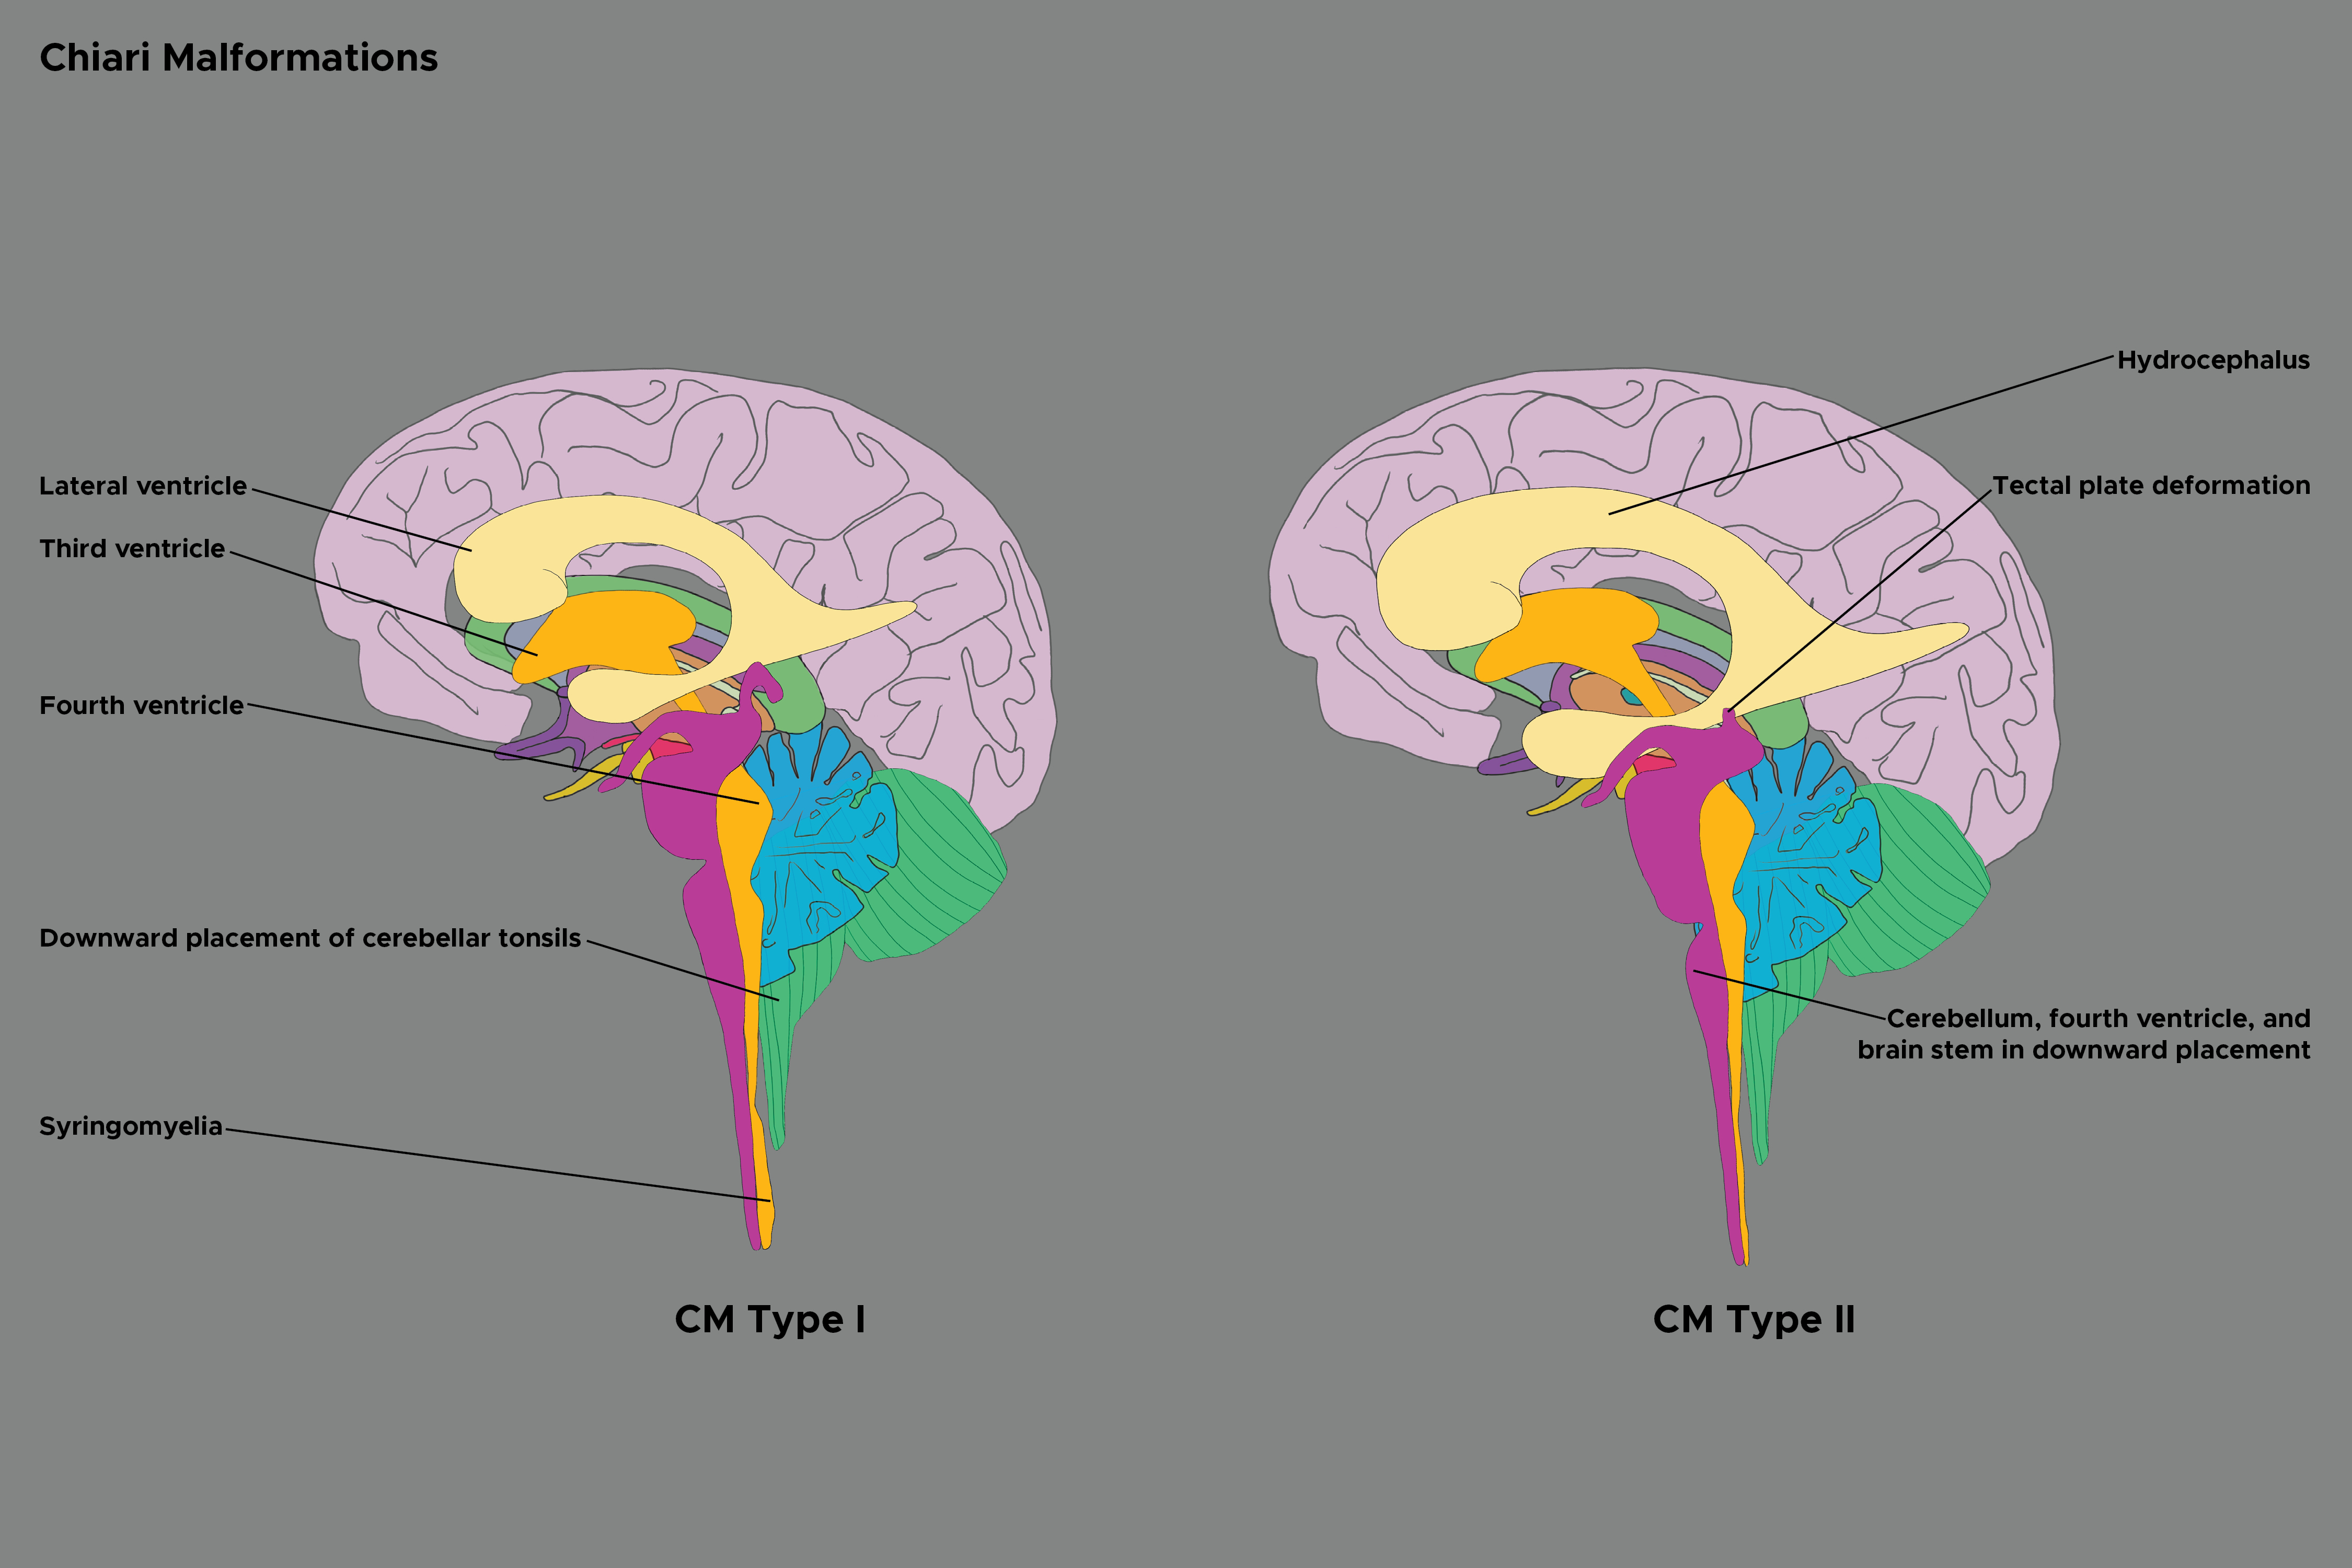 Illustration of Chiari Malformations. CM types I and II.